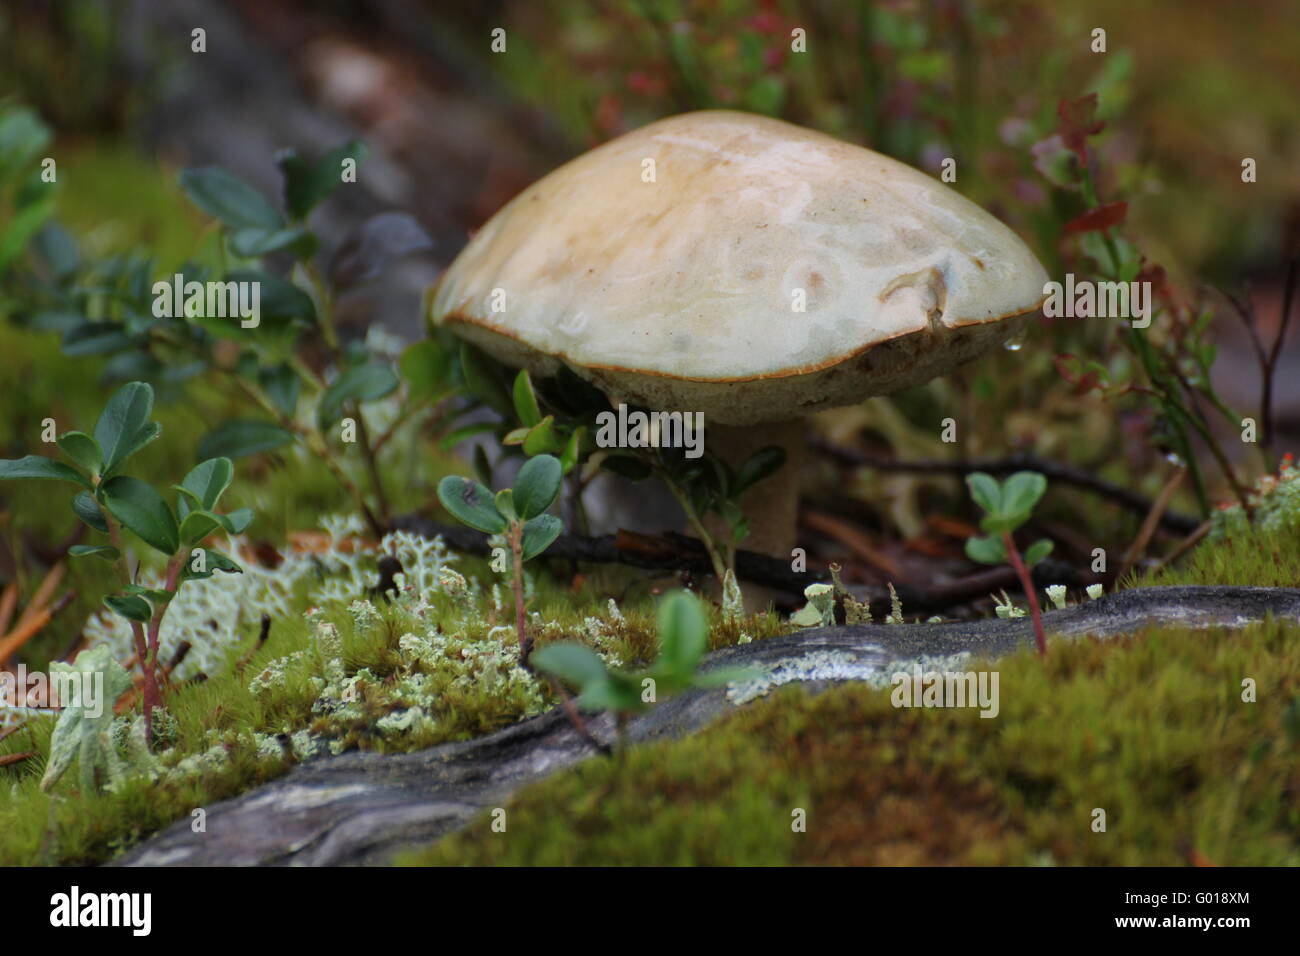 A single mushroom between moss and wood in Sweden. Stock Photo